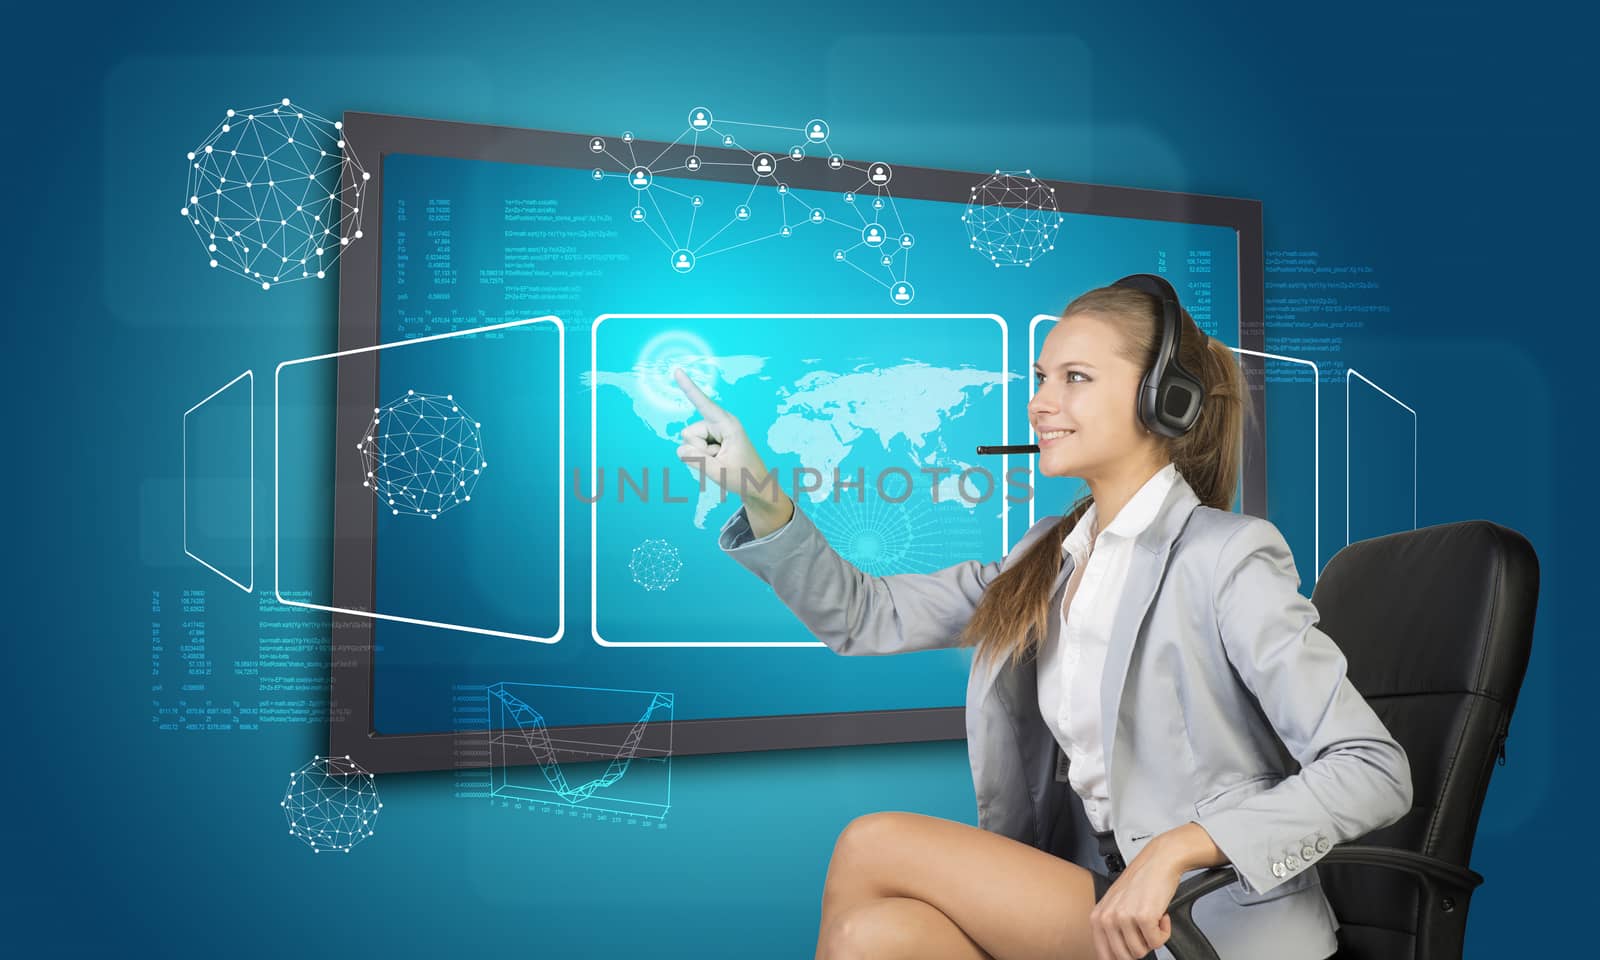 Businesswoman in headset using touch screen interface with world map and other elements, on blue background